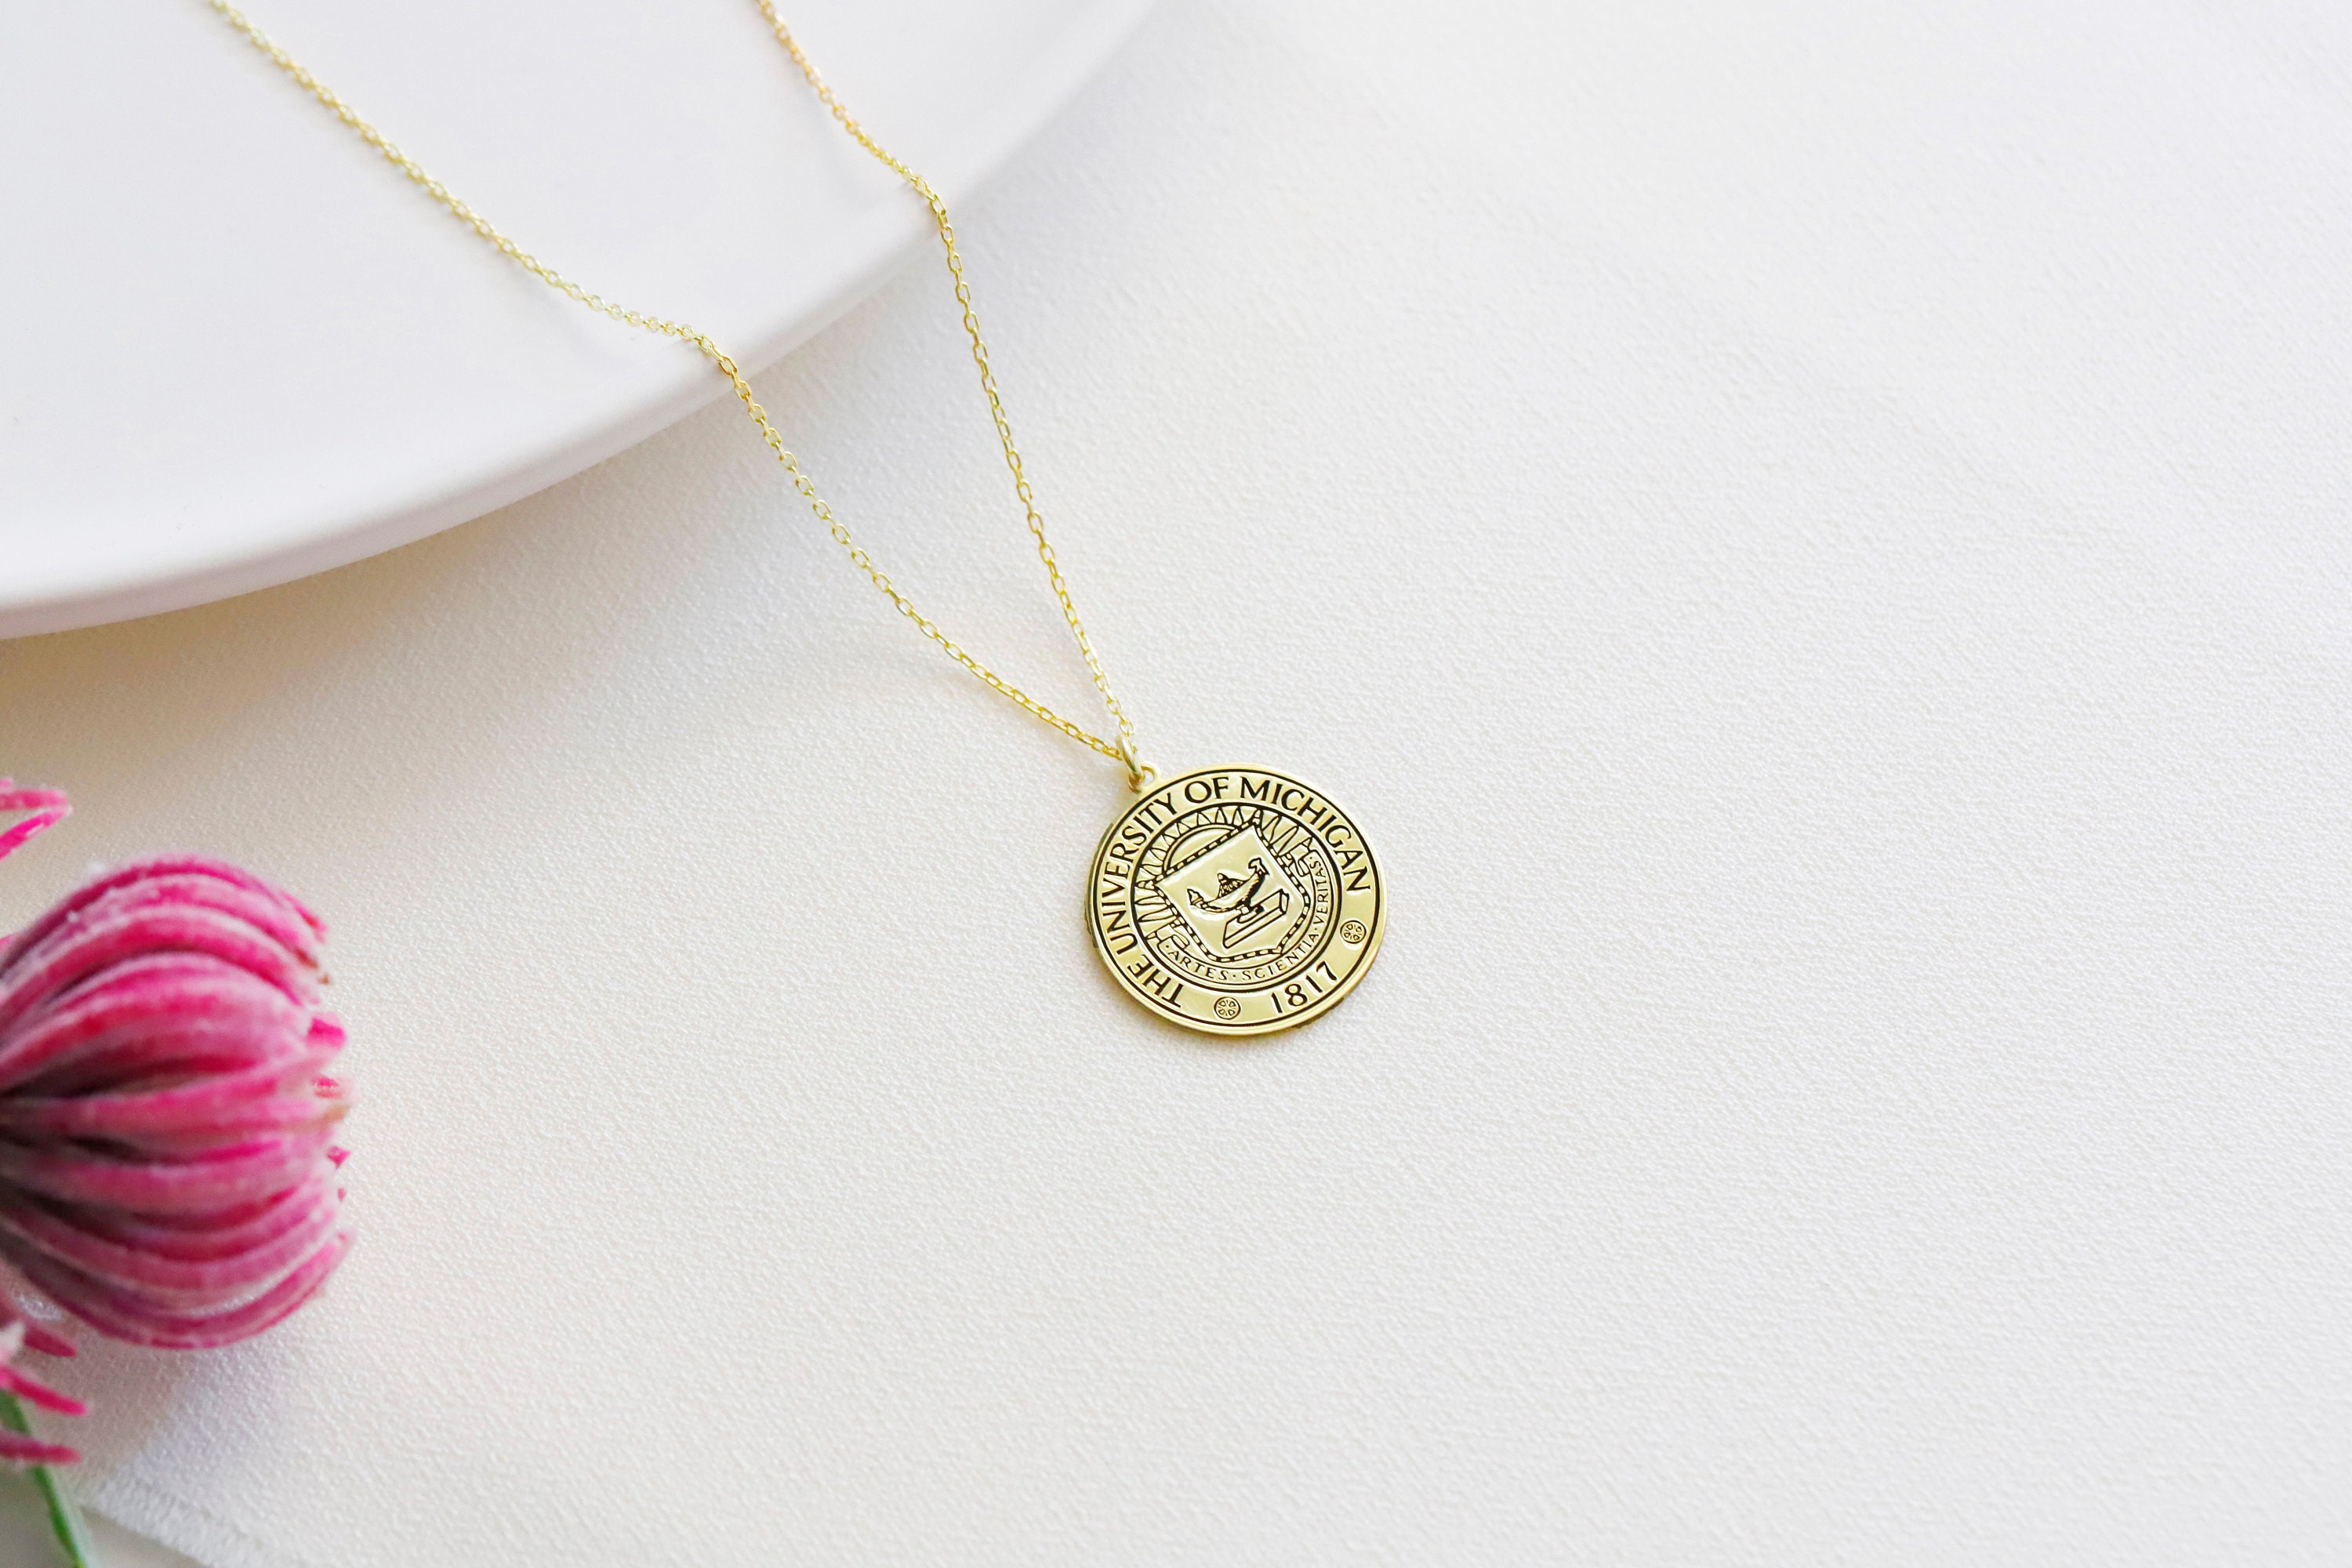 Graduation Necklace, Custom Logo Necklace, Gold Necklace, Personalized College Necklace, University Graduation Necklace, Custom College Gift